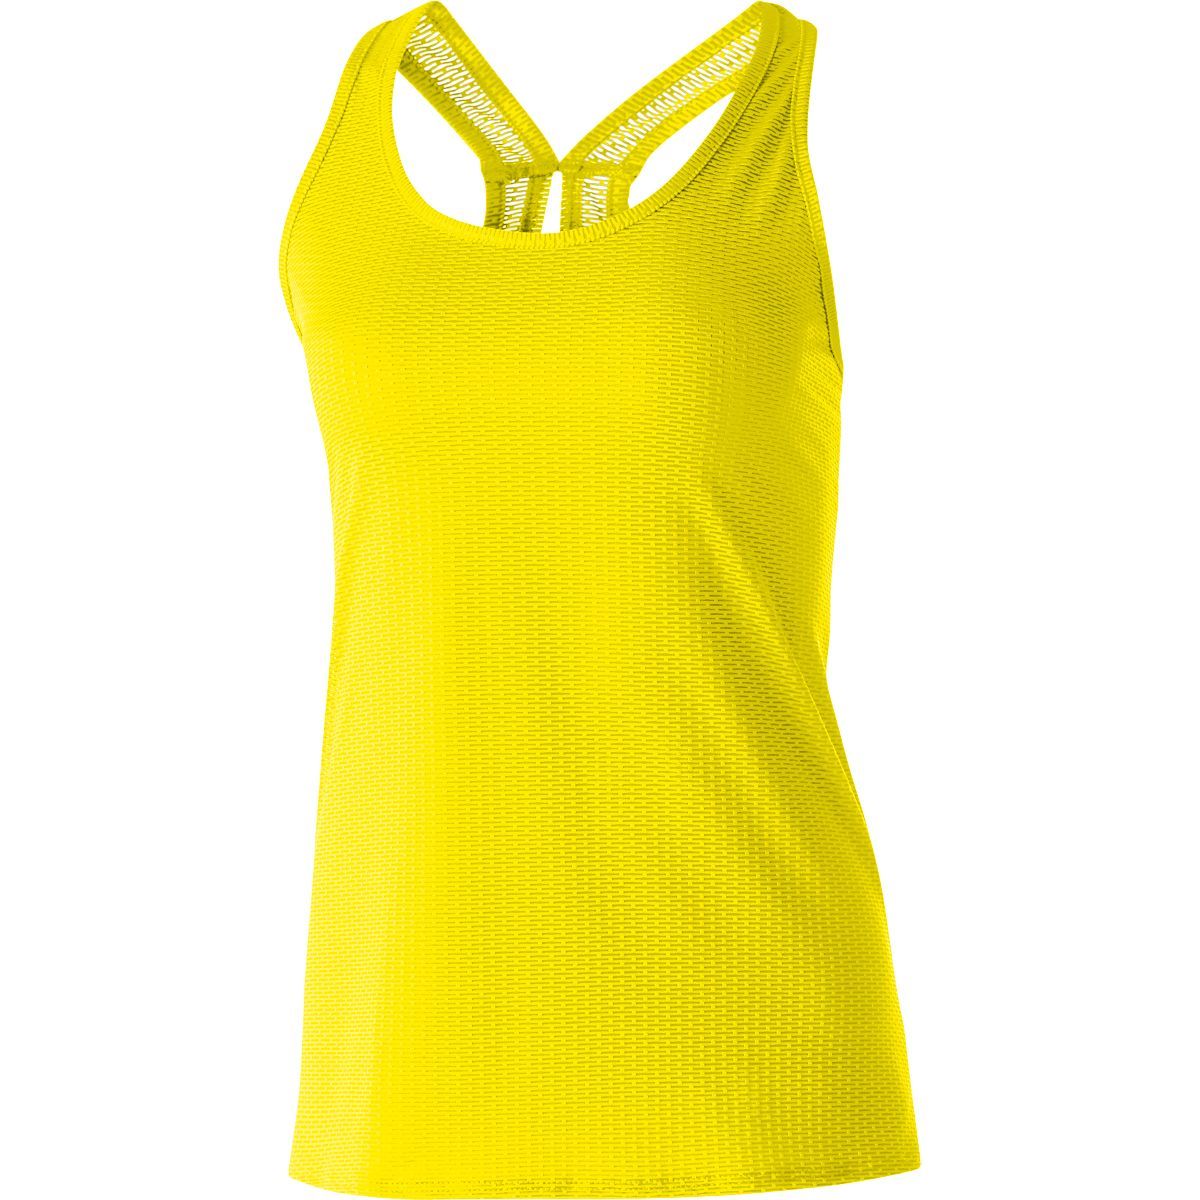 Holloway Ladies Precision Tank in Bright Yellow  -Part of the Ladies, Ladies-Tank, Holloway, Shirts product lines at KanaleyCreations.com